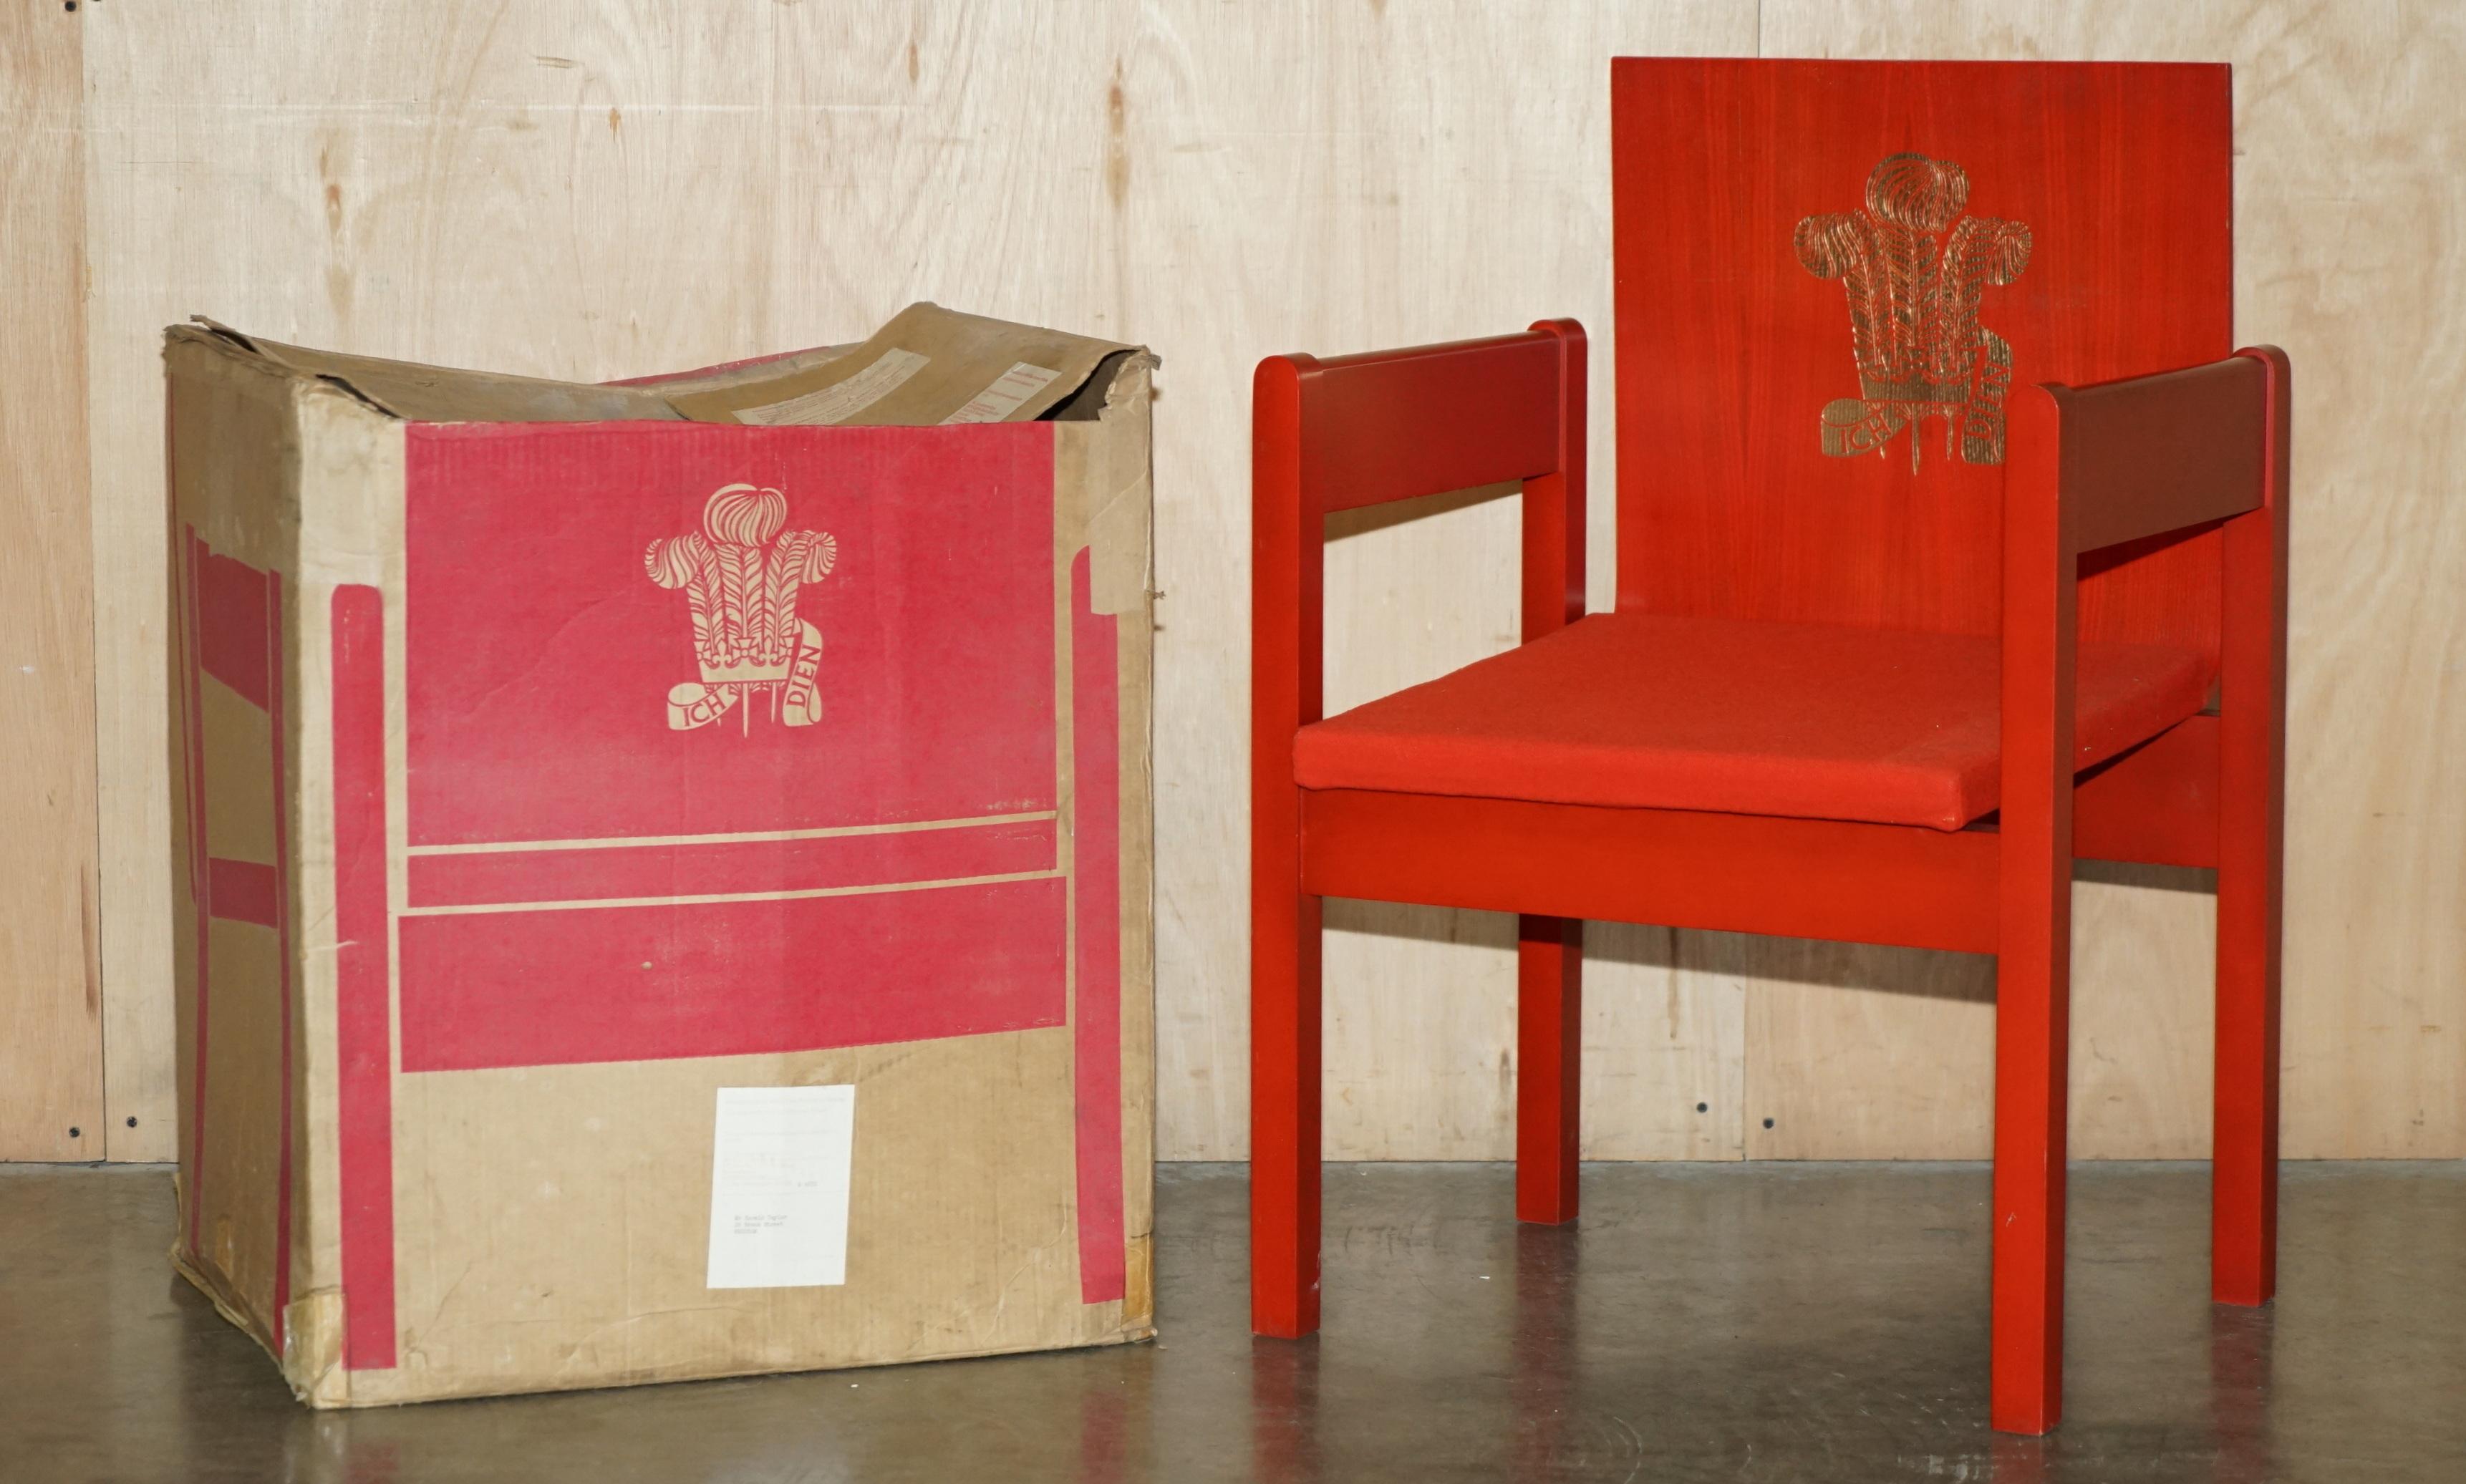 LAST OF ITS KIND BRAND NEW IN THE BOX 1969 PRINCE CHARLES INVESTITURE ARMCHAiR For Sale 6